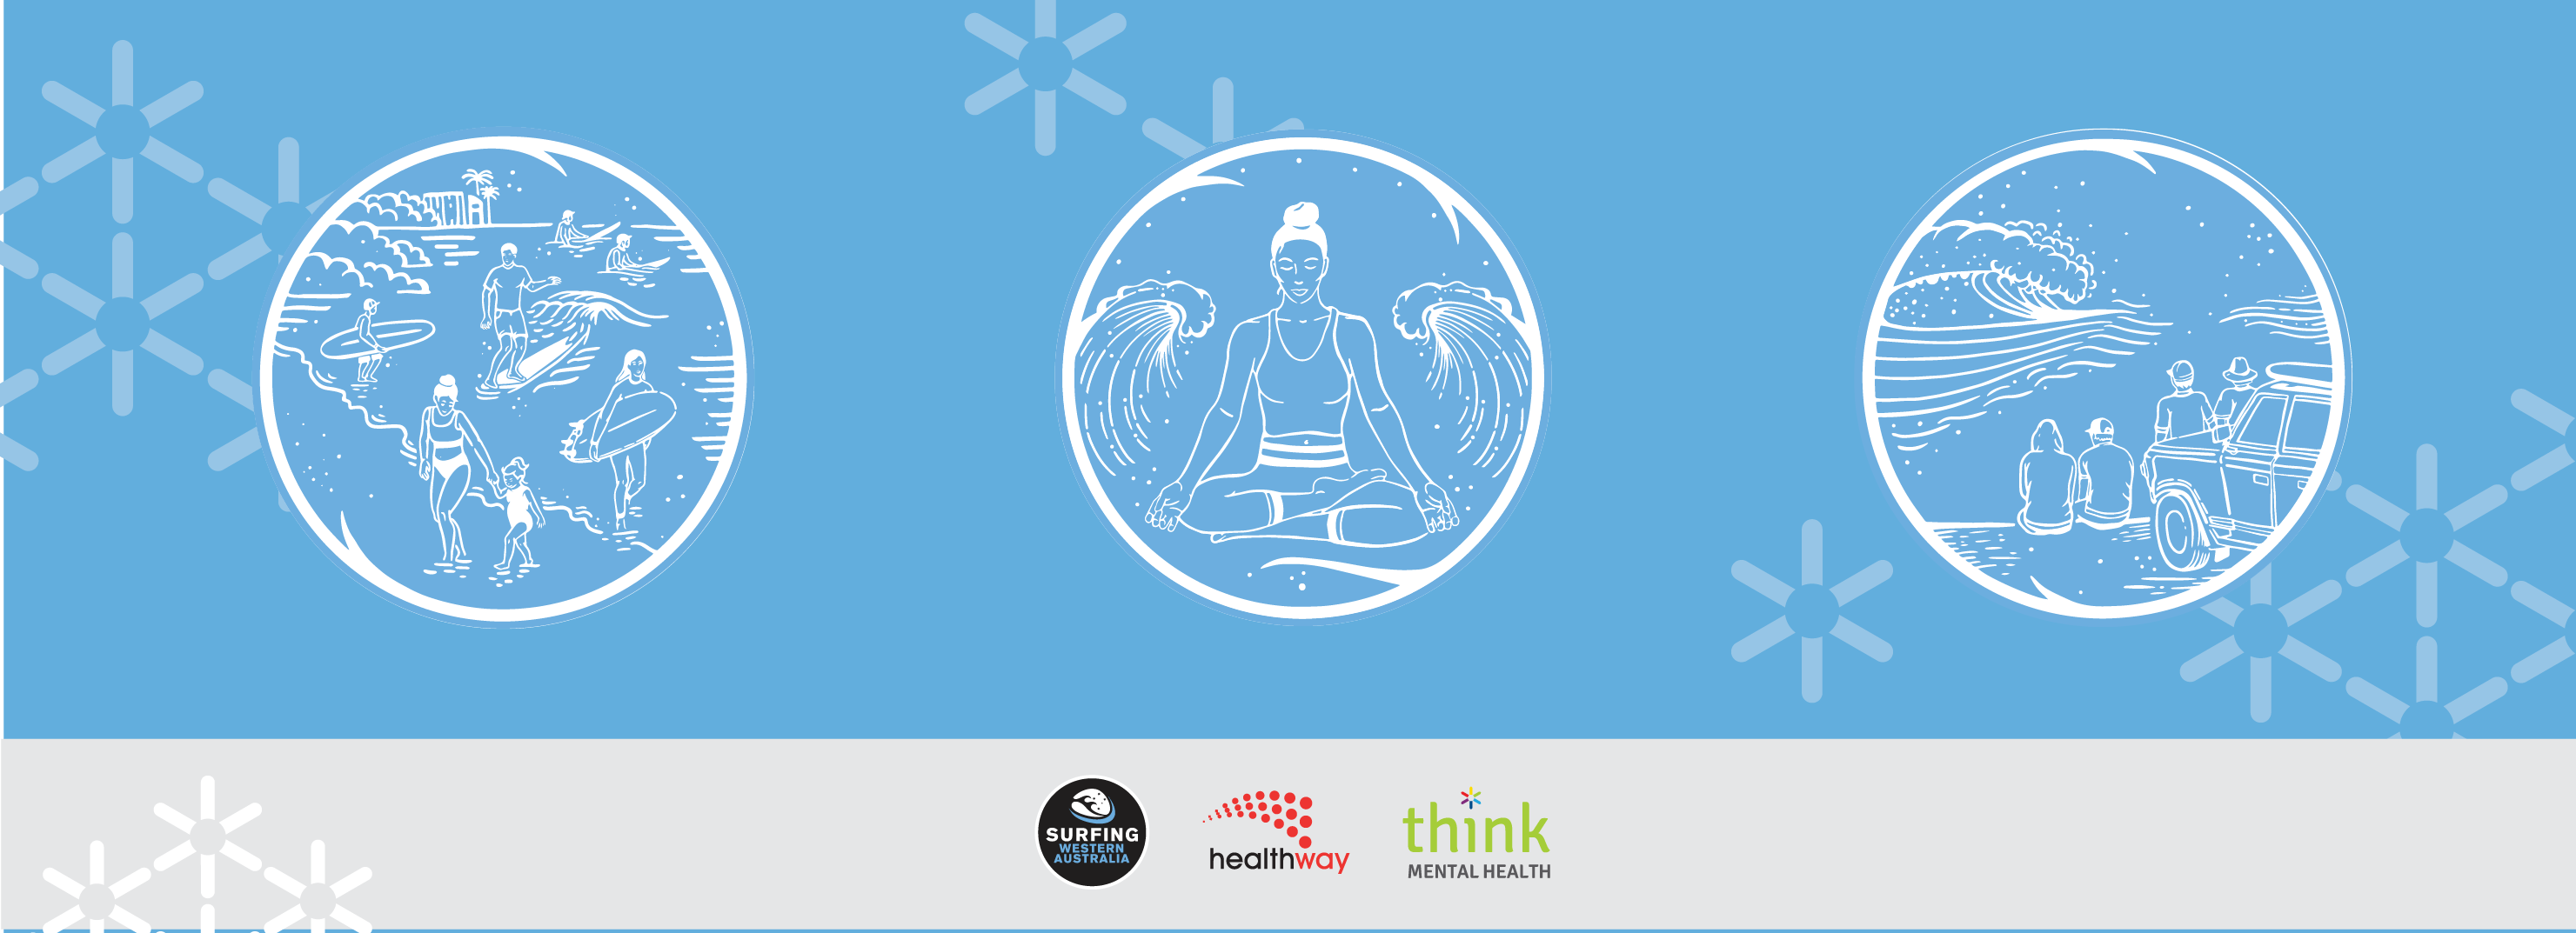 Think Mental Health with Surfing WA and Healthway